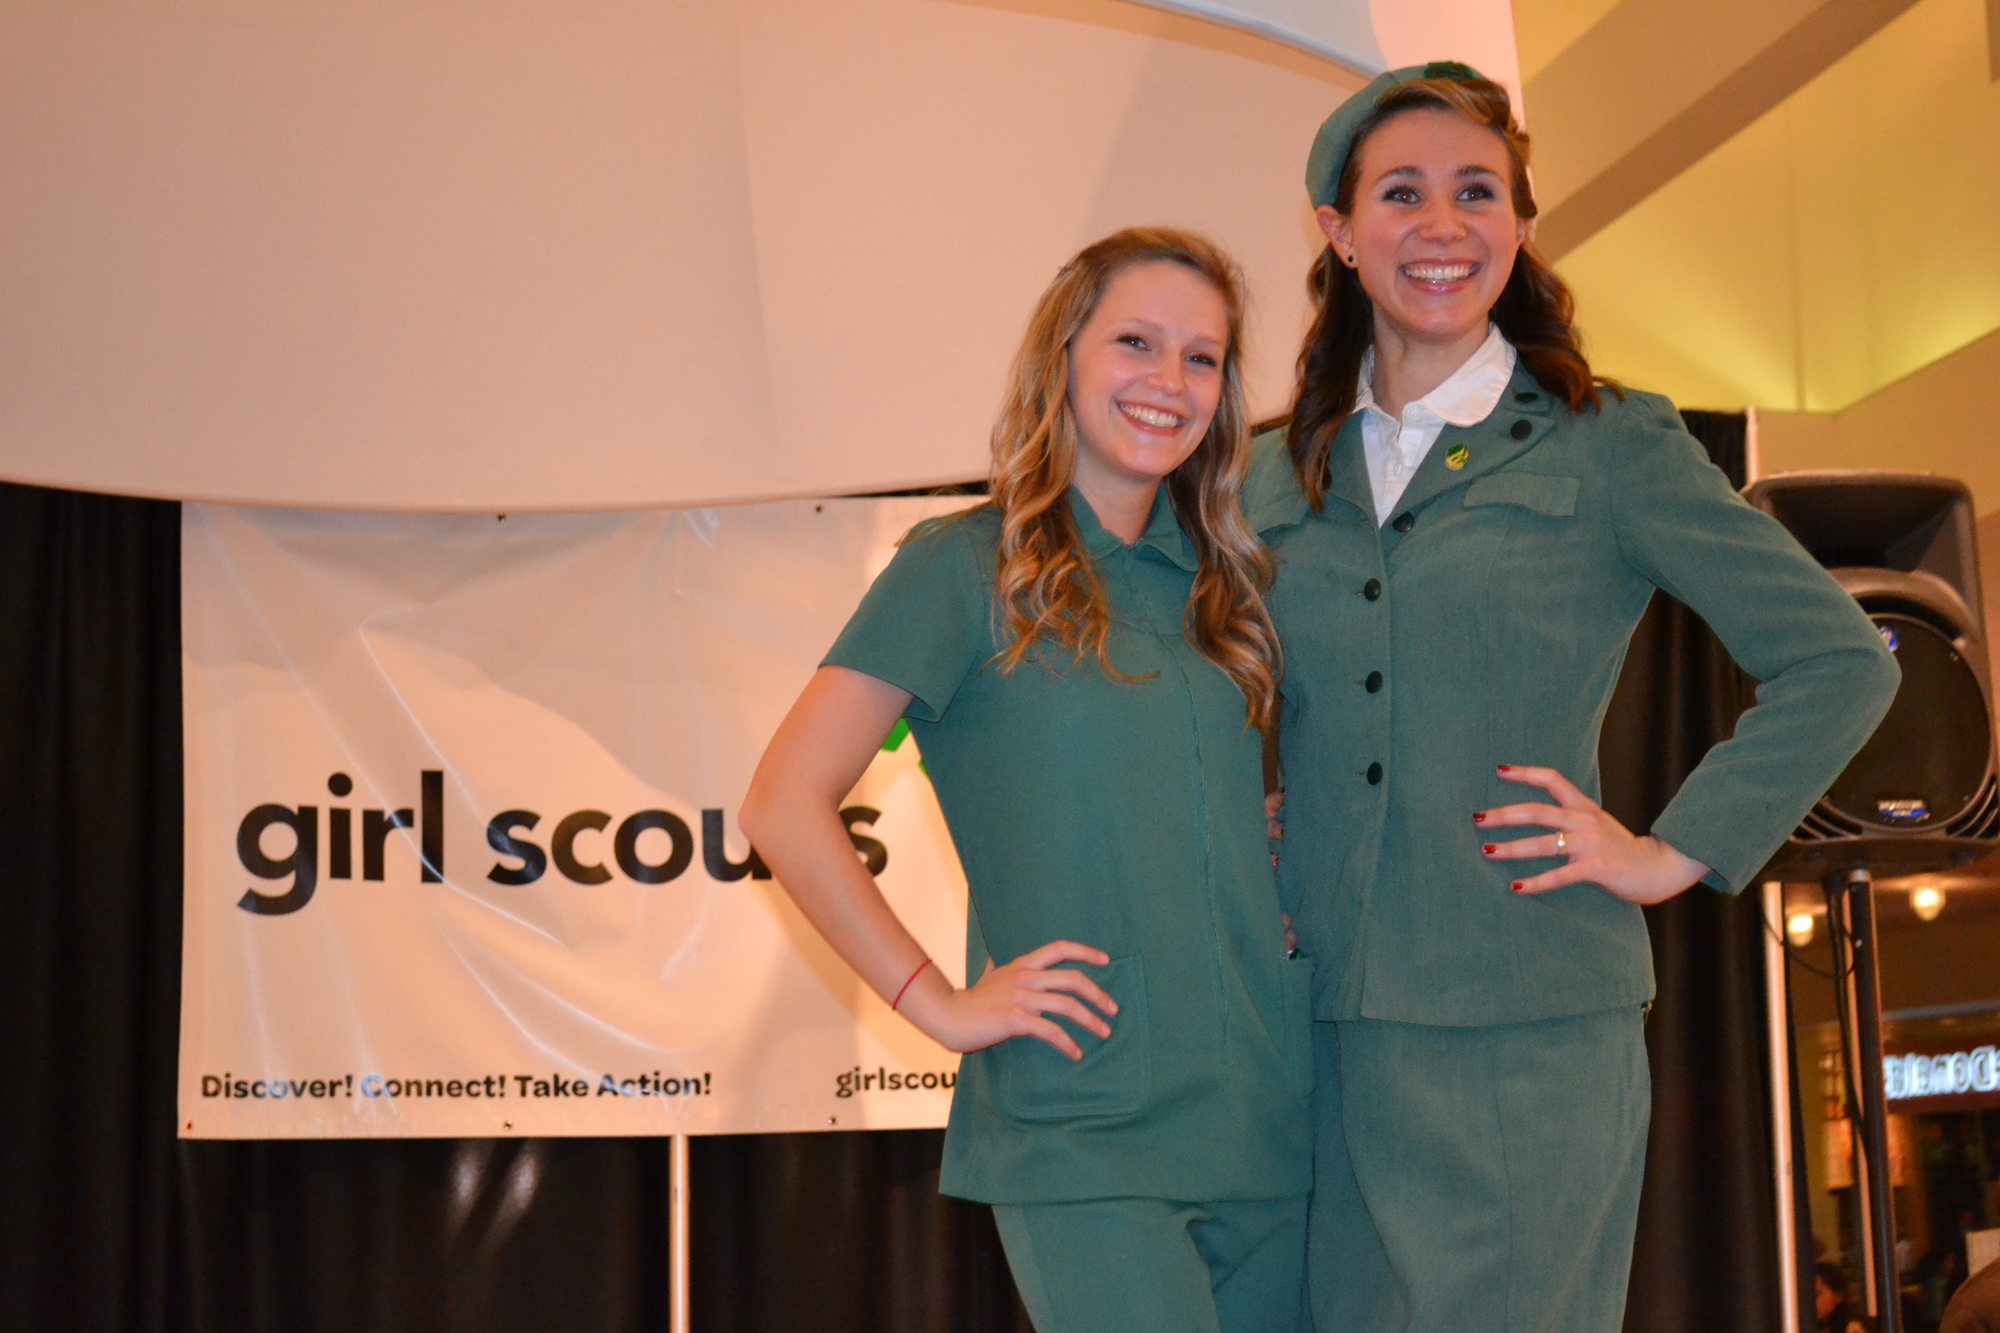 Van Mall: Kait Hafenbrack, left, and Ema Hadziselimovic, Washington State University students and Girl Scouts of Oregon and Southwest Washington volunteers, modeled vintage Girl Scout attire at the March 30 Girl Scouts After Dark event at Westfield Vancouver mall.